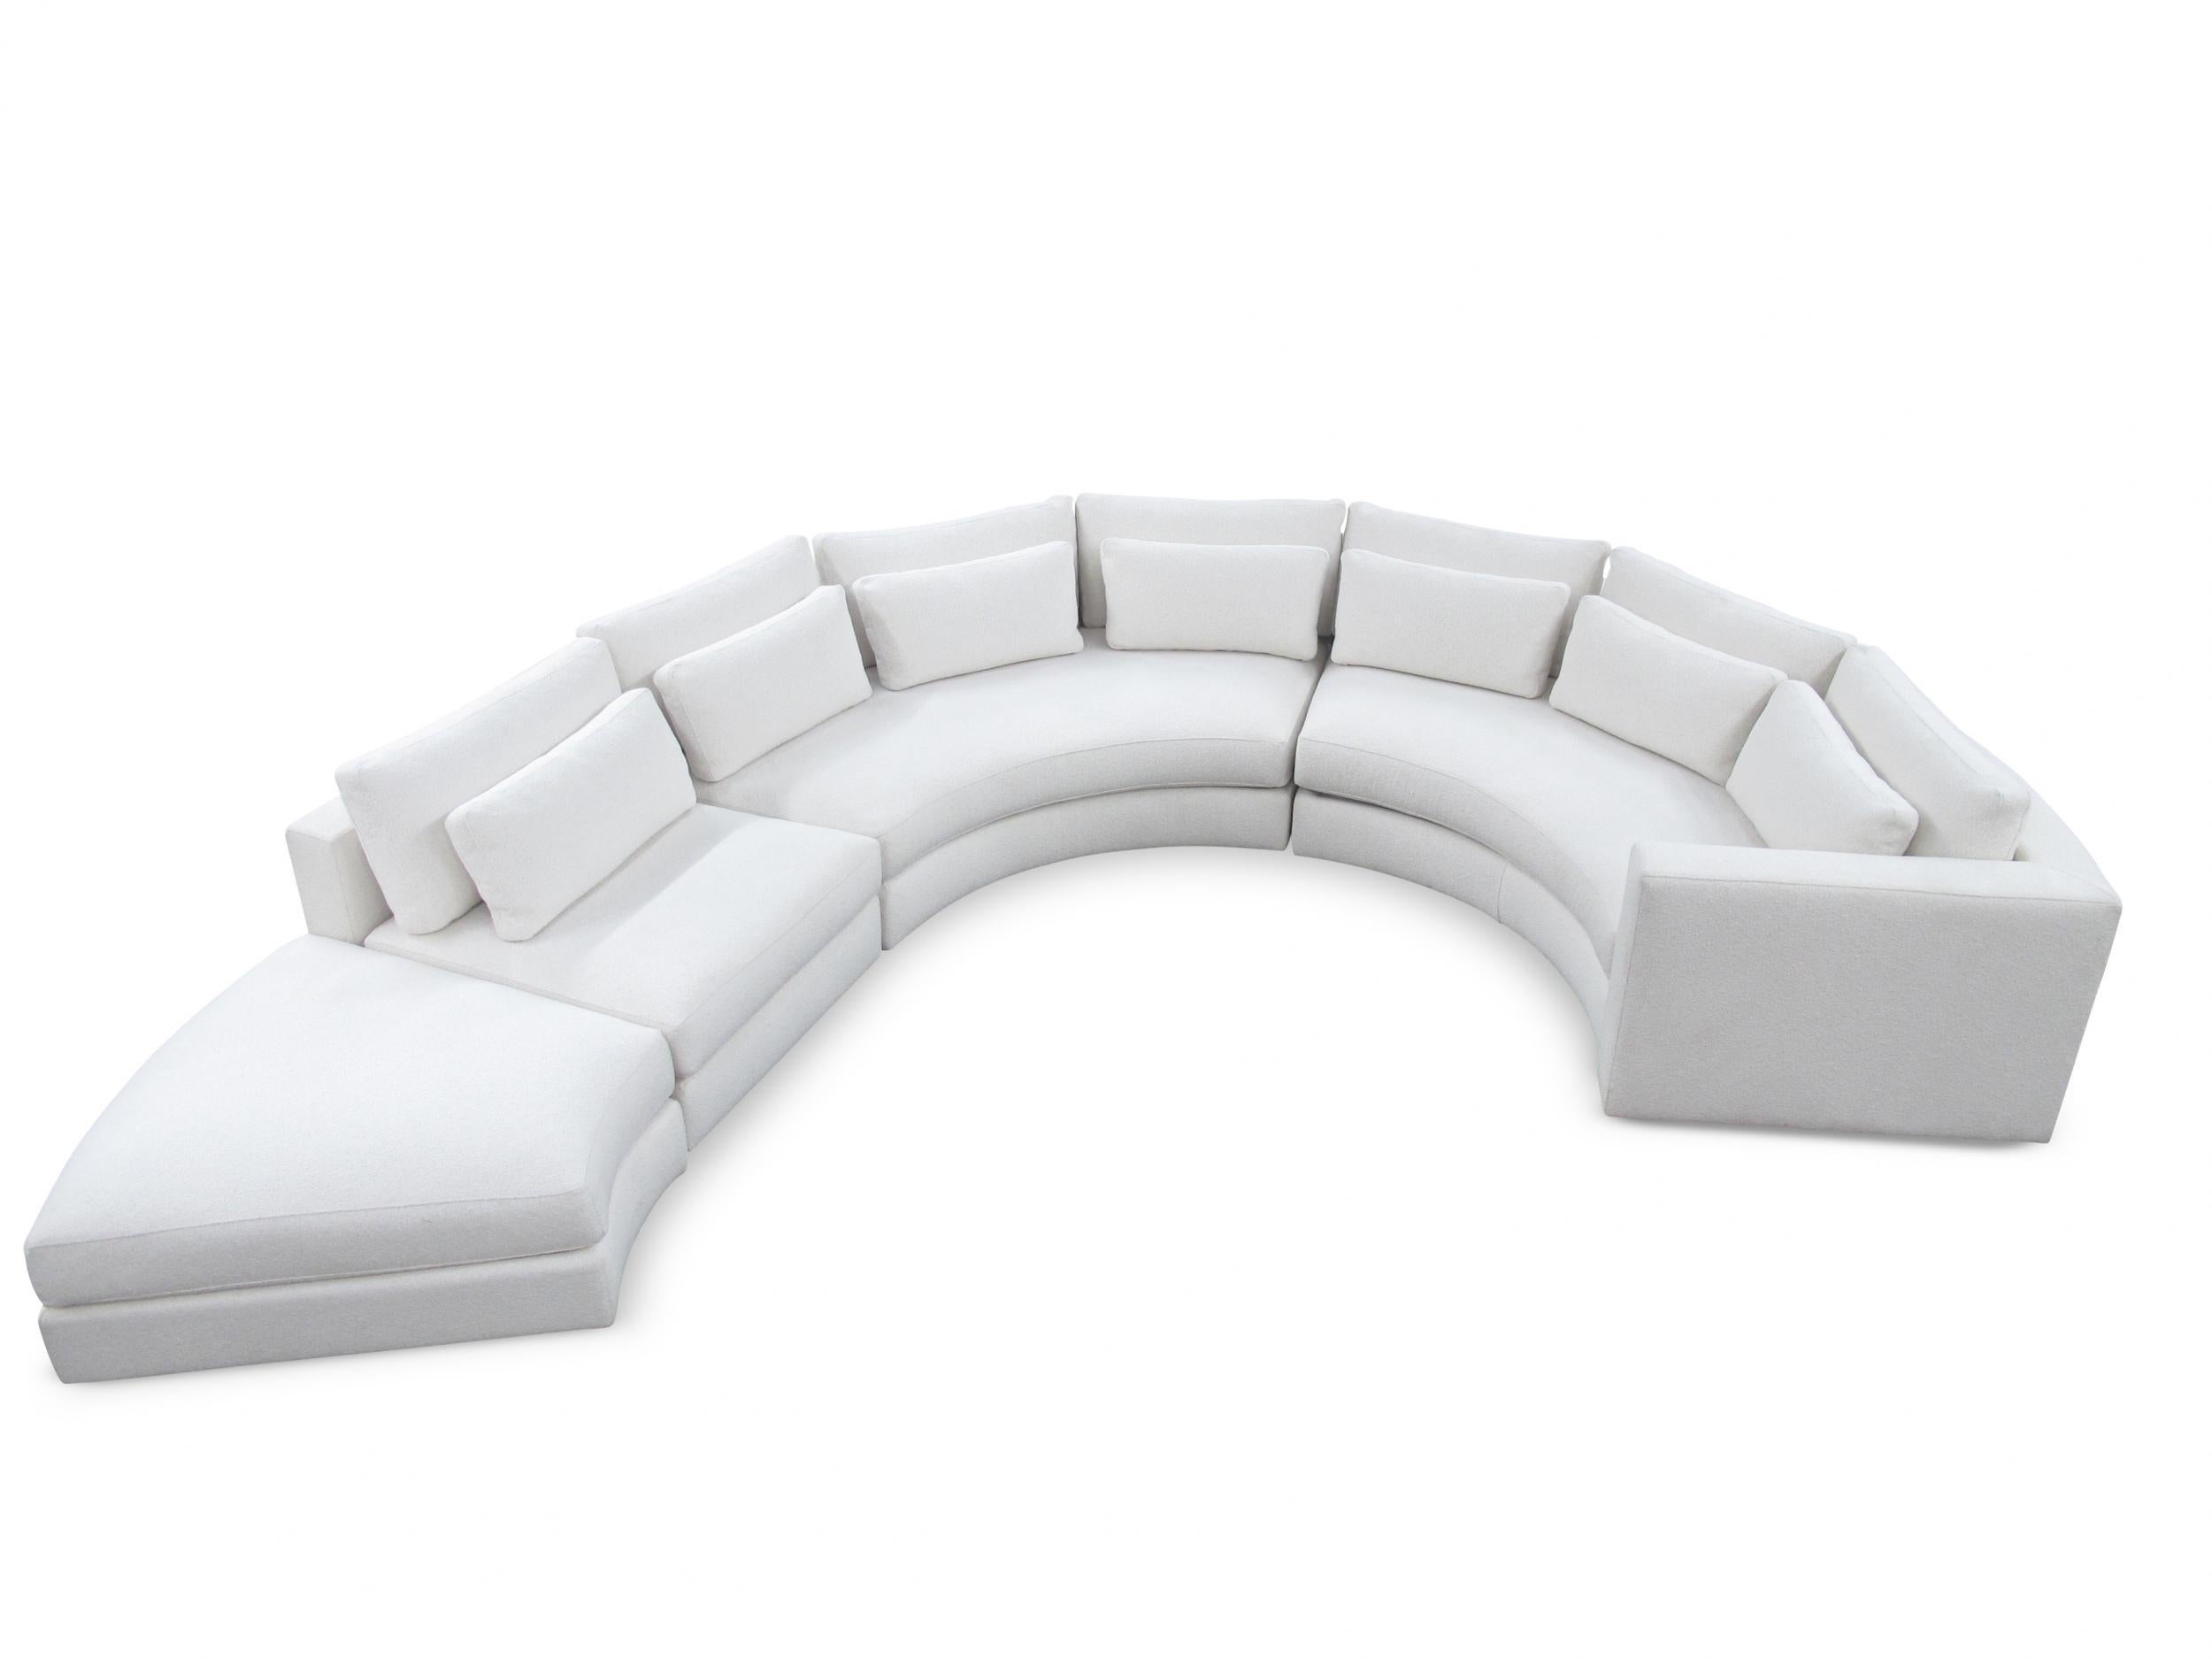 Fabric Thayer Coggin Round Sectional Sofa in off White